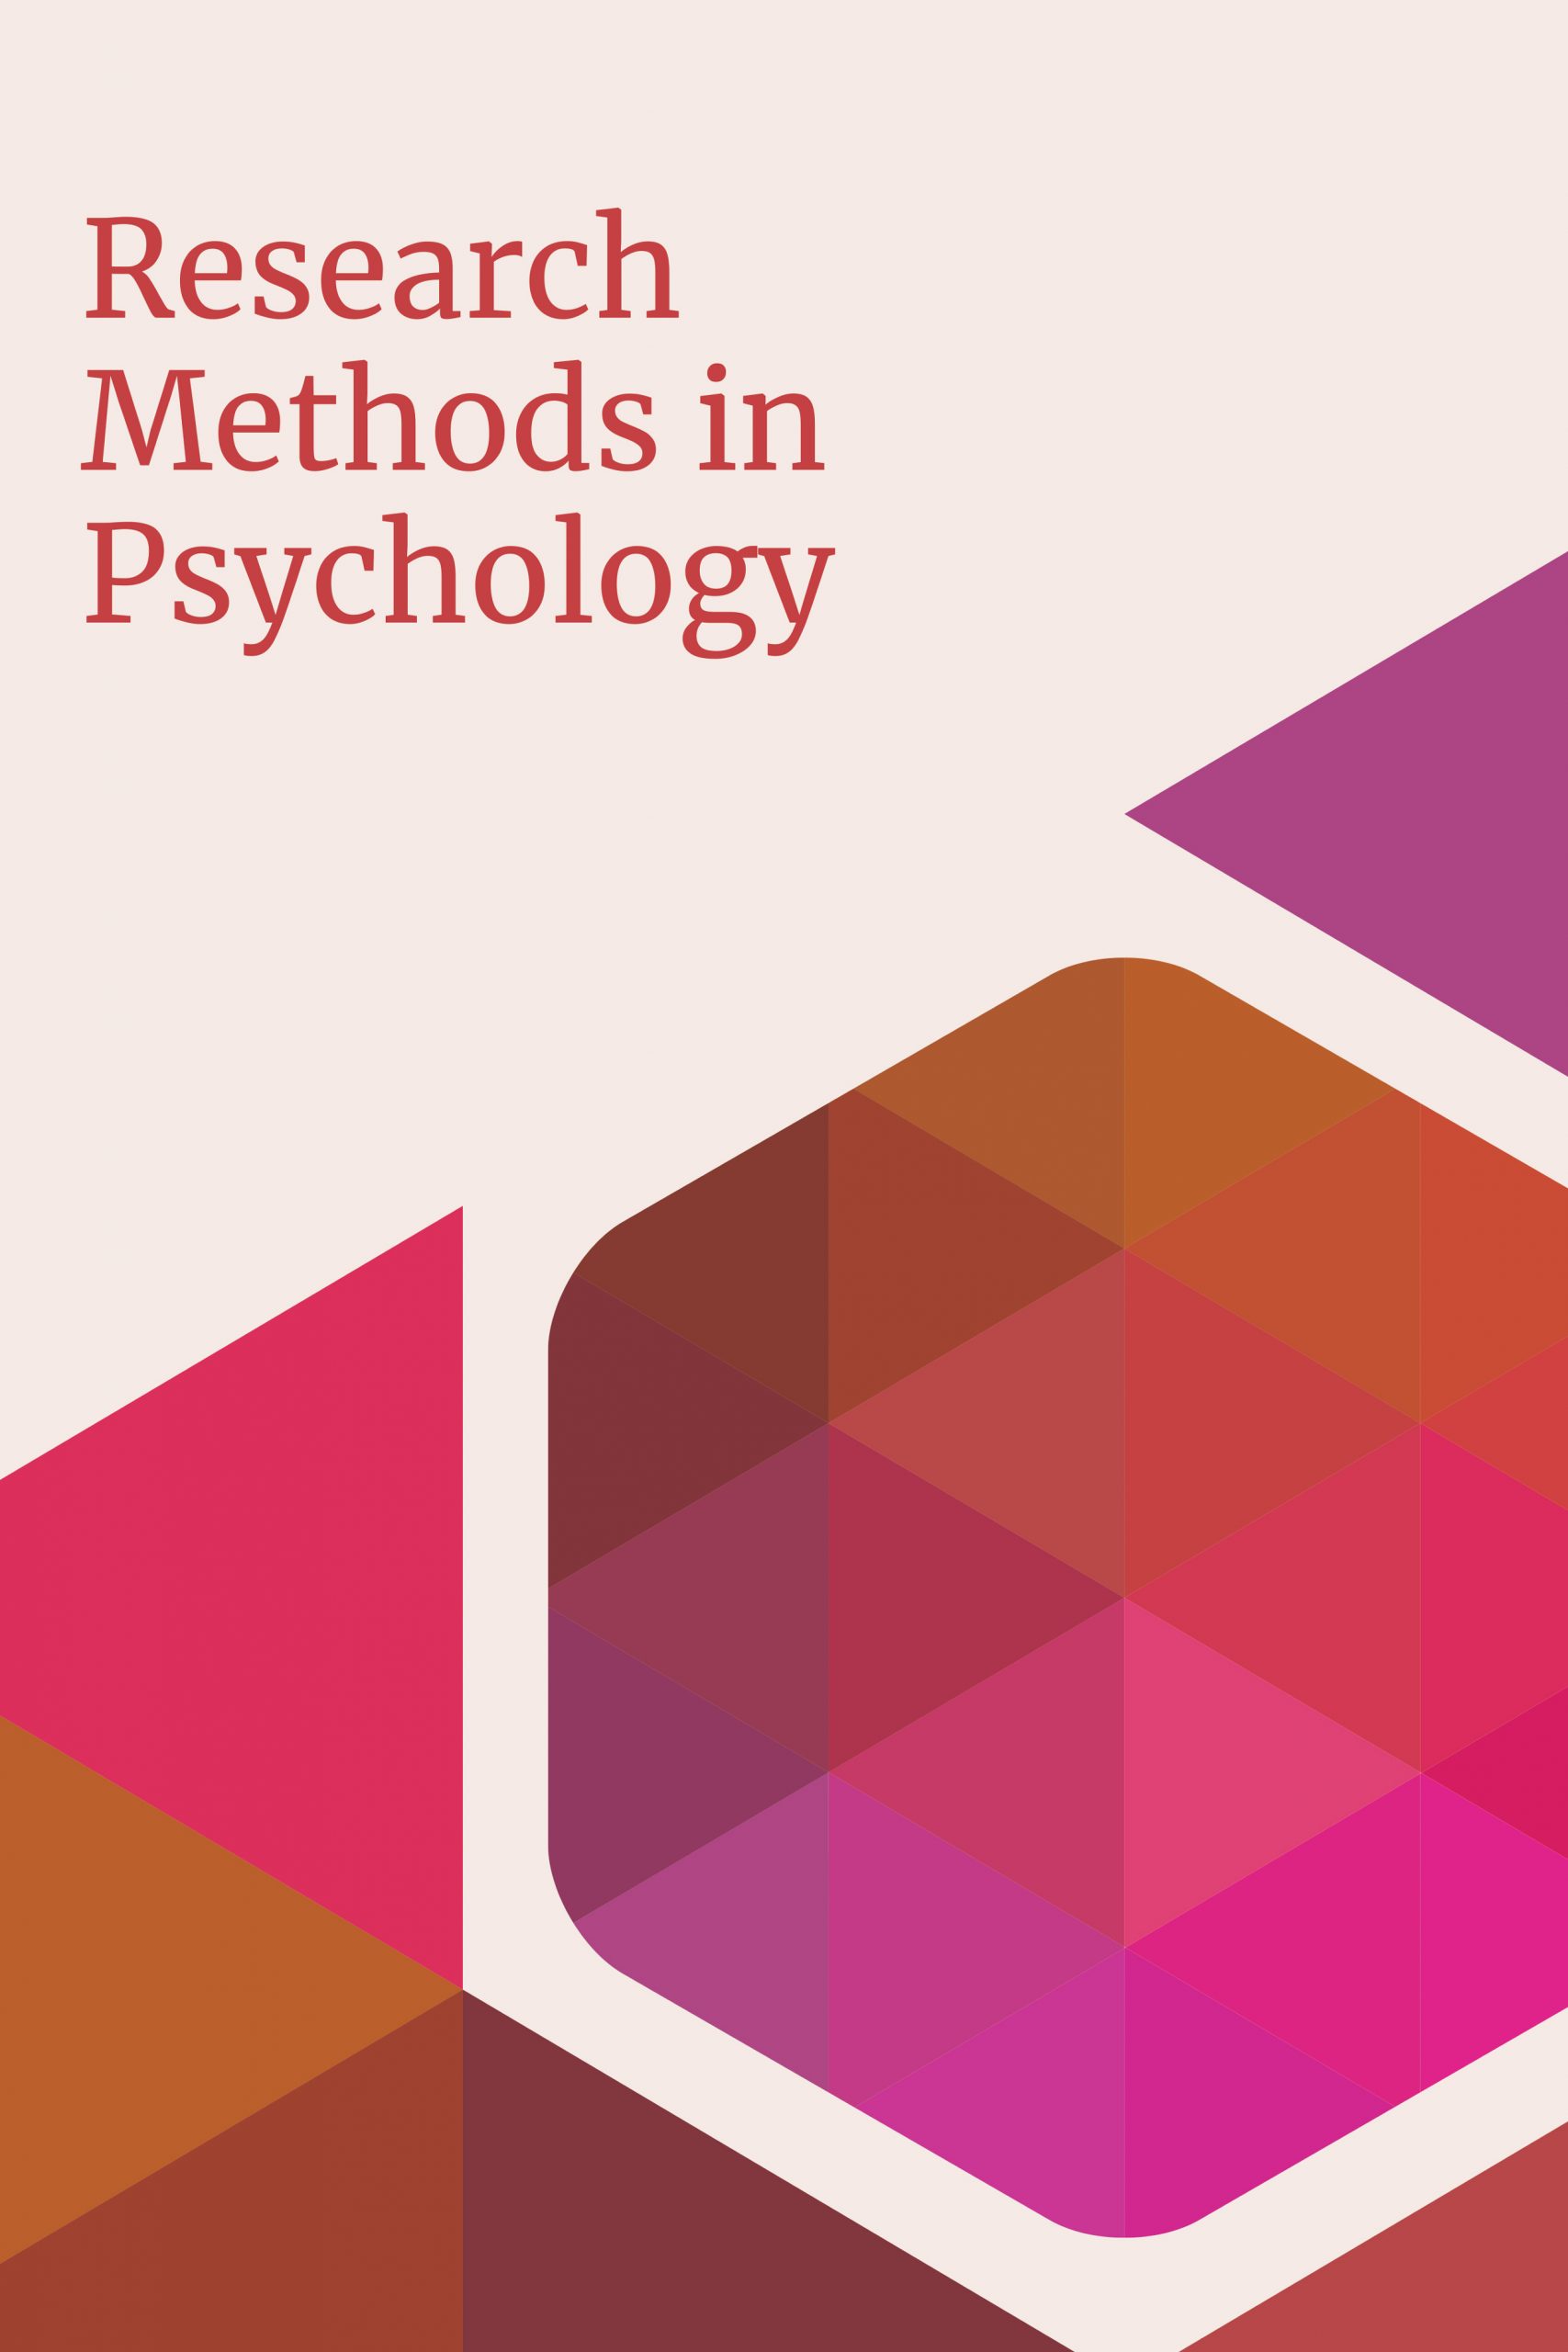 articles about psychological research methods